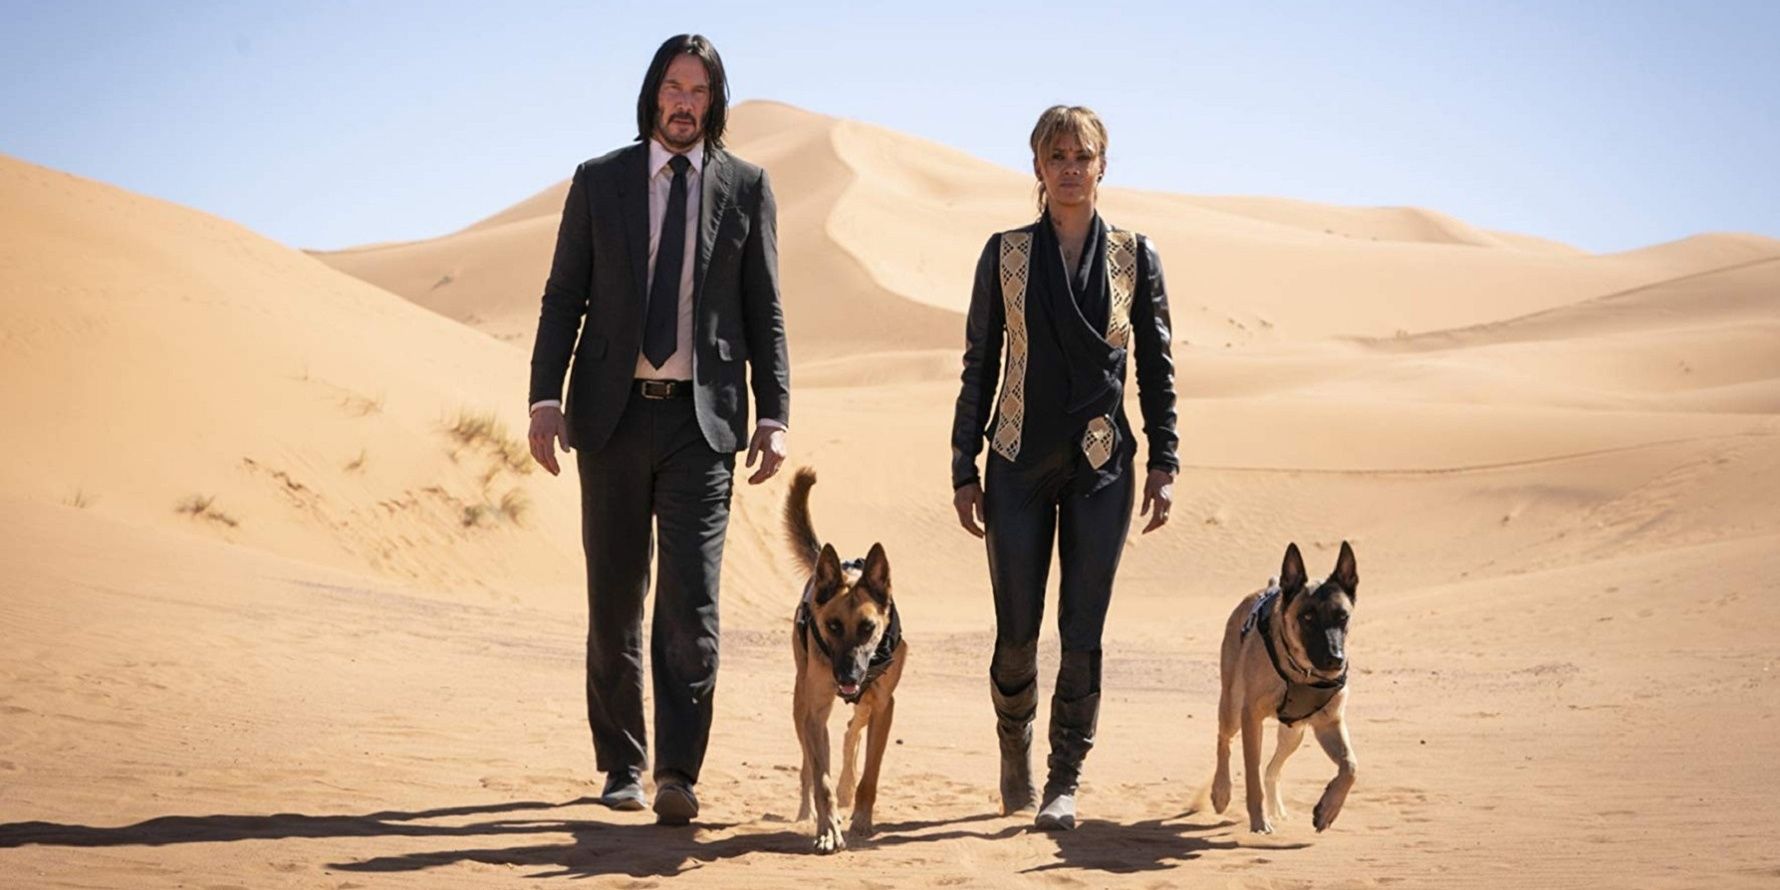 Keanu Reeves and Halle Berry walk through the desert with dogs in John Wick: Chapter 3 - Parabellum